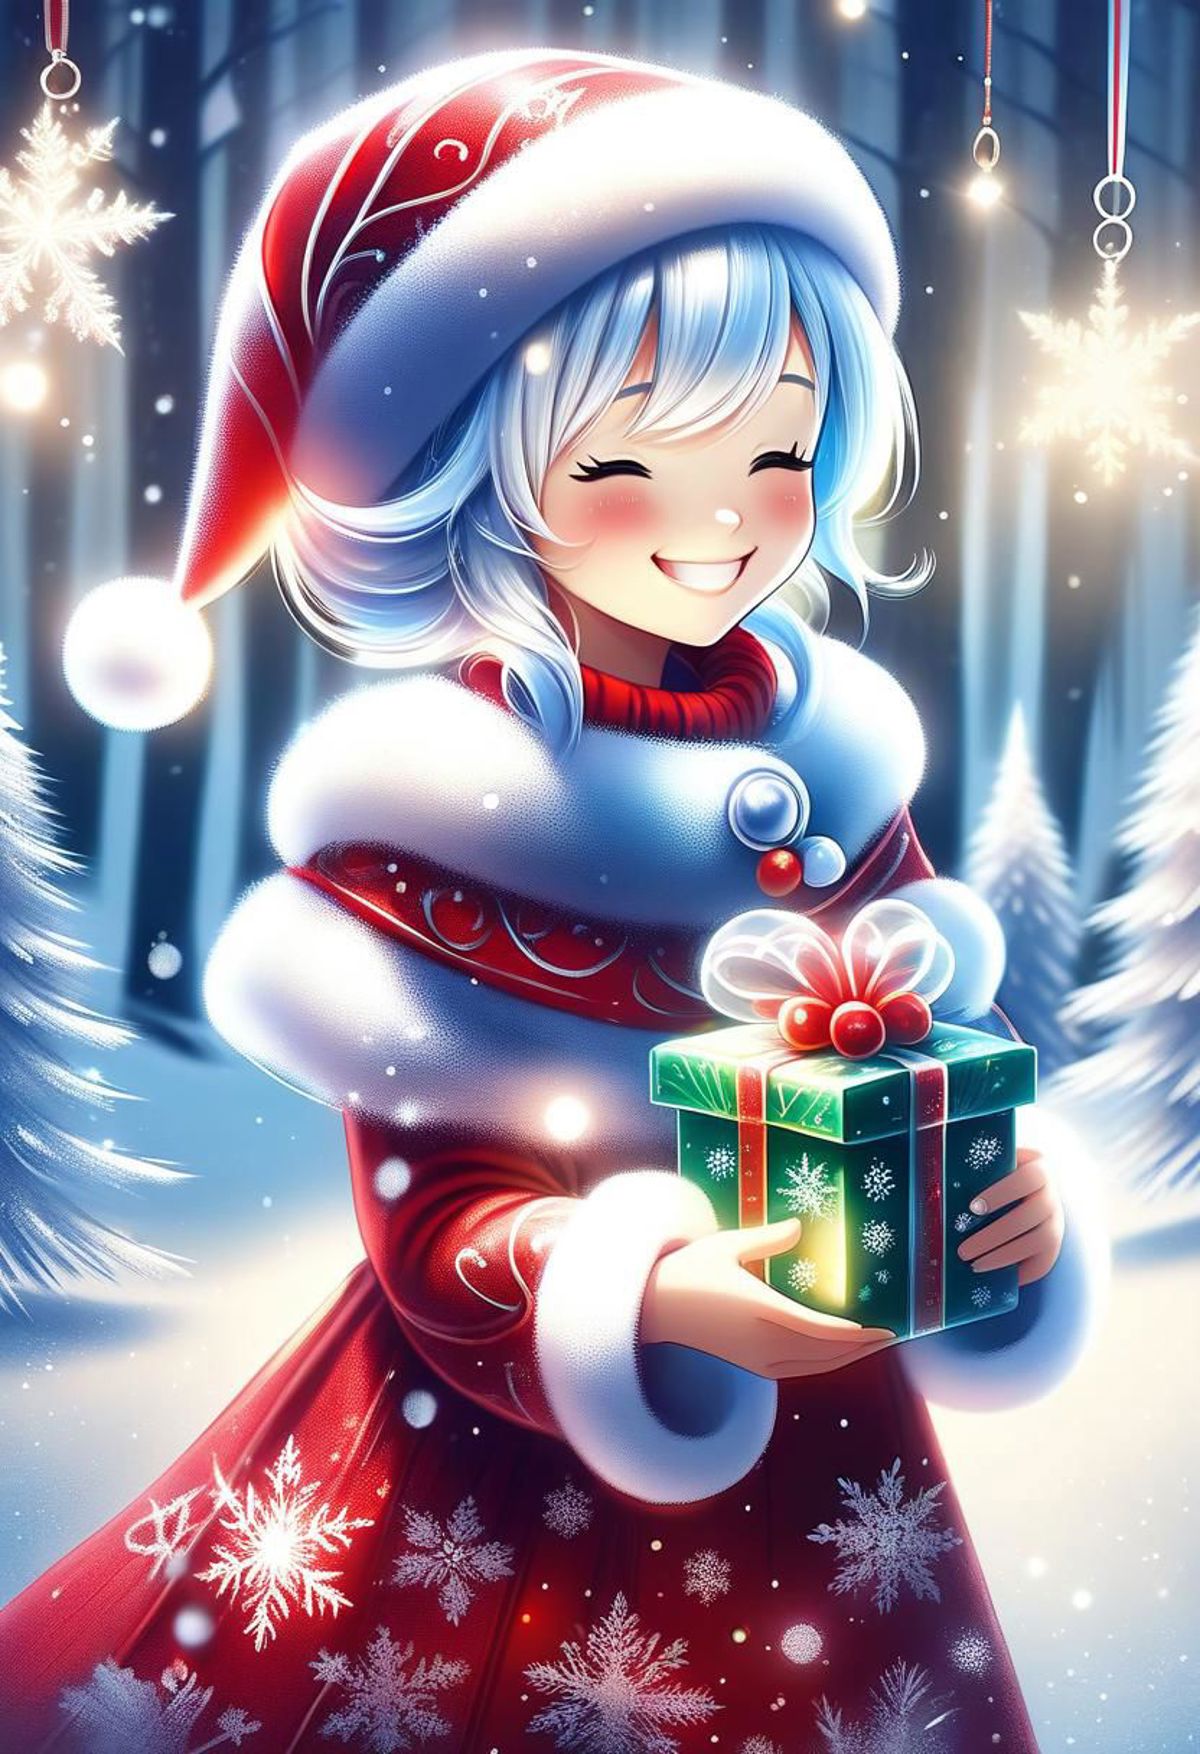 A cute girl in a snow suit holding a Christmas present.